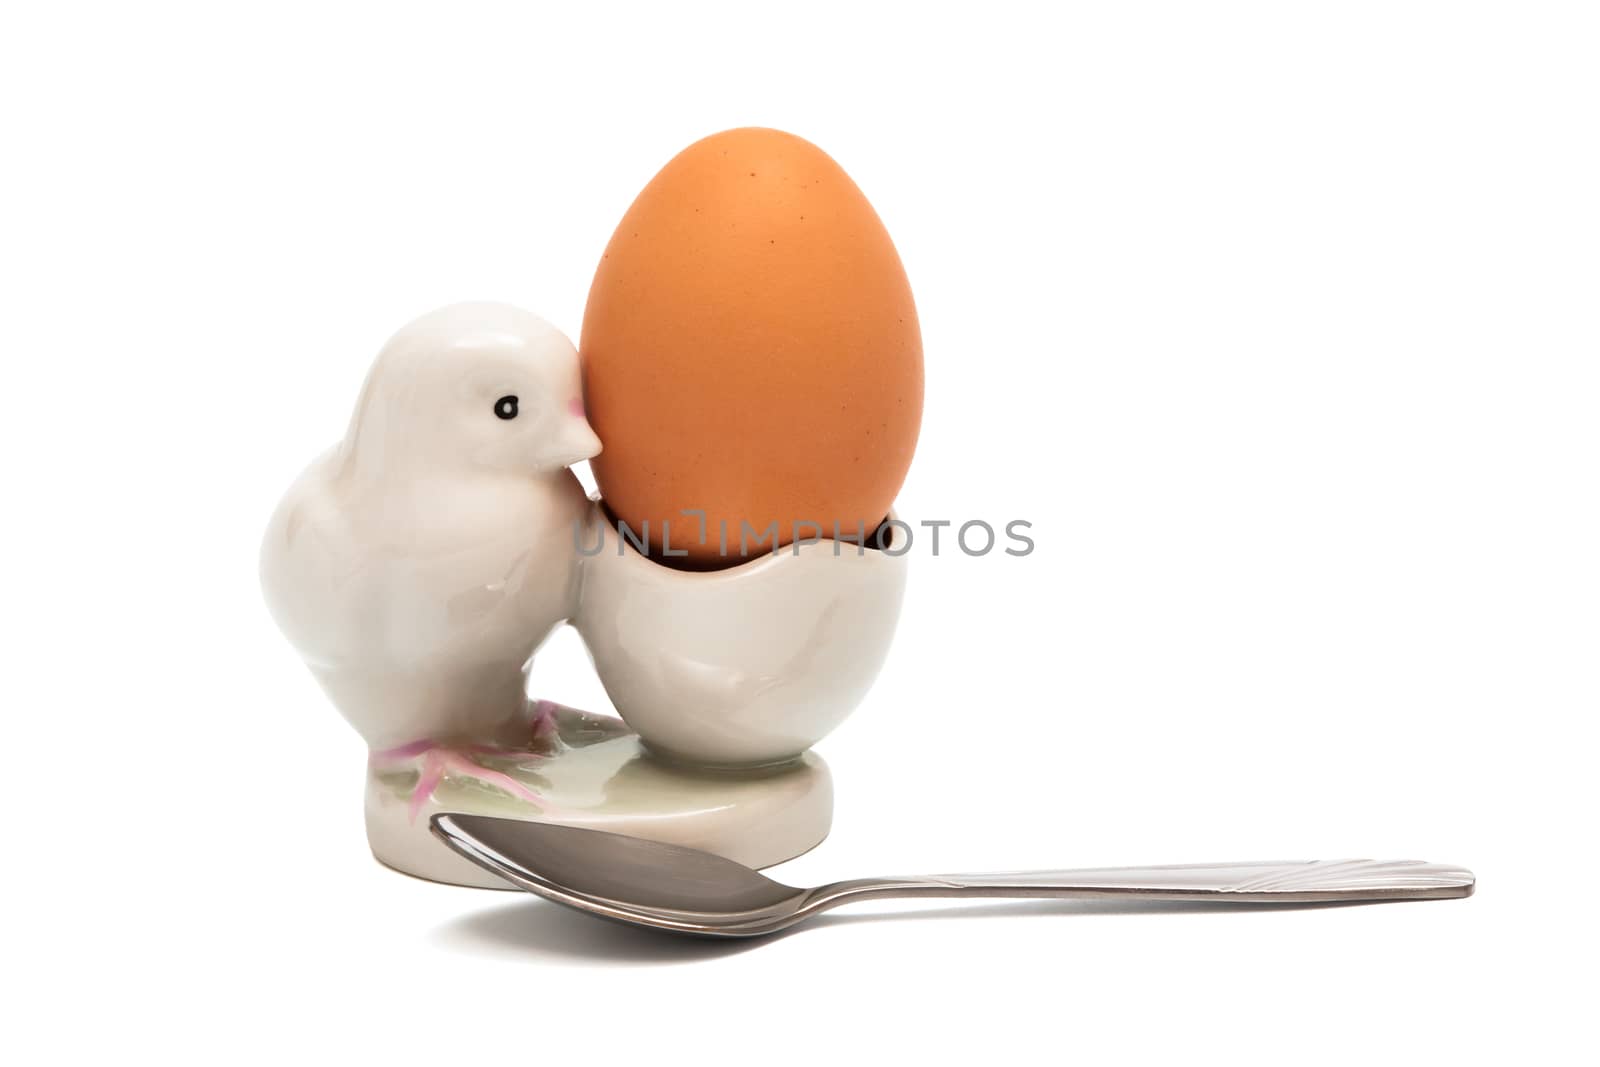 Egg and the spoon  by terex